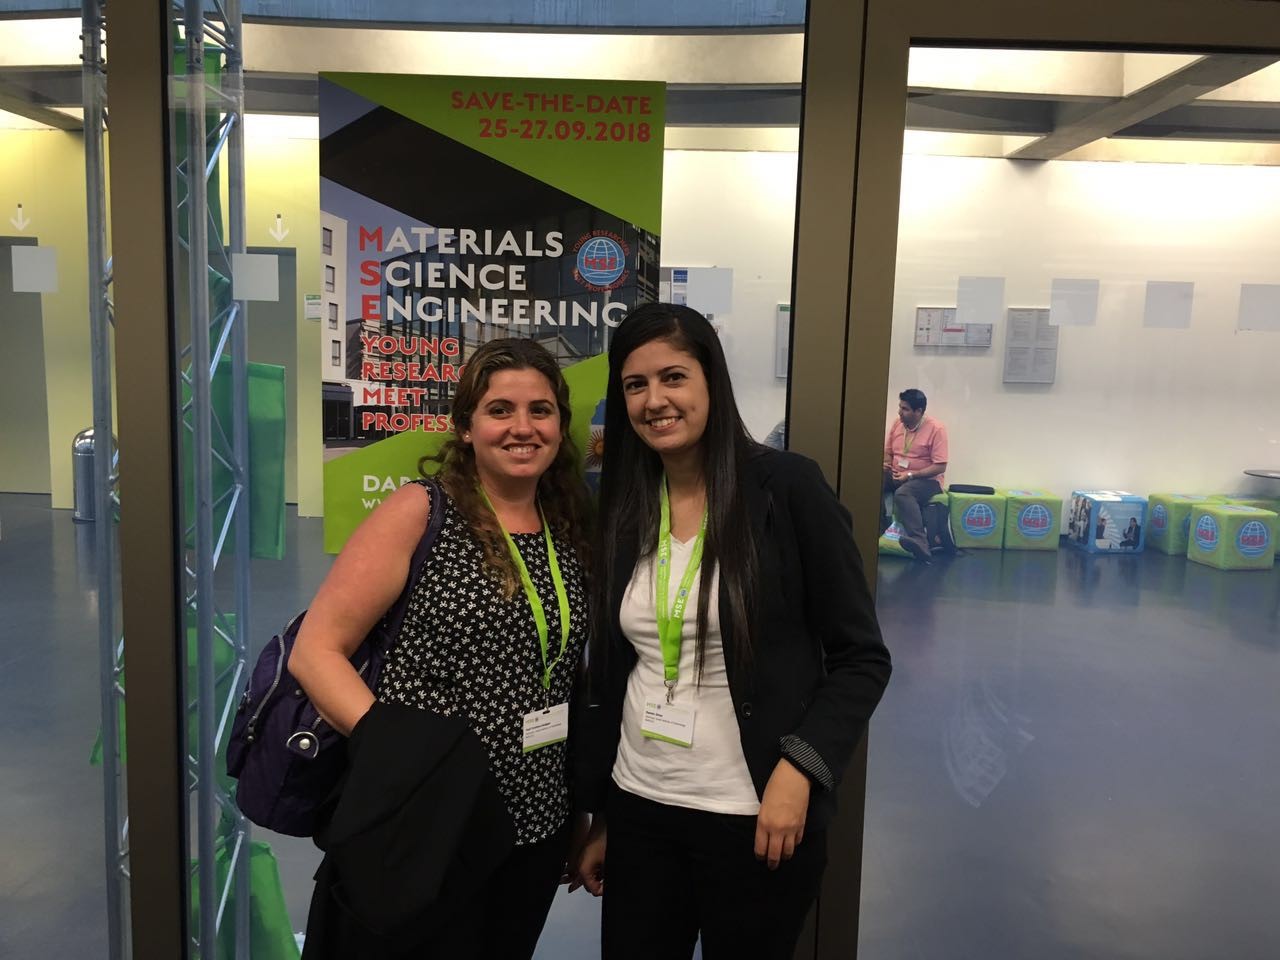 Tsuf and Rawan at the Material Science Engineering Conference in Germany, 2016